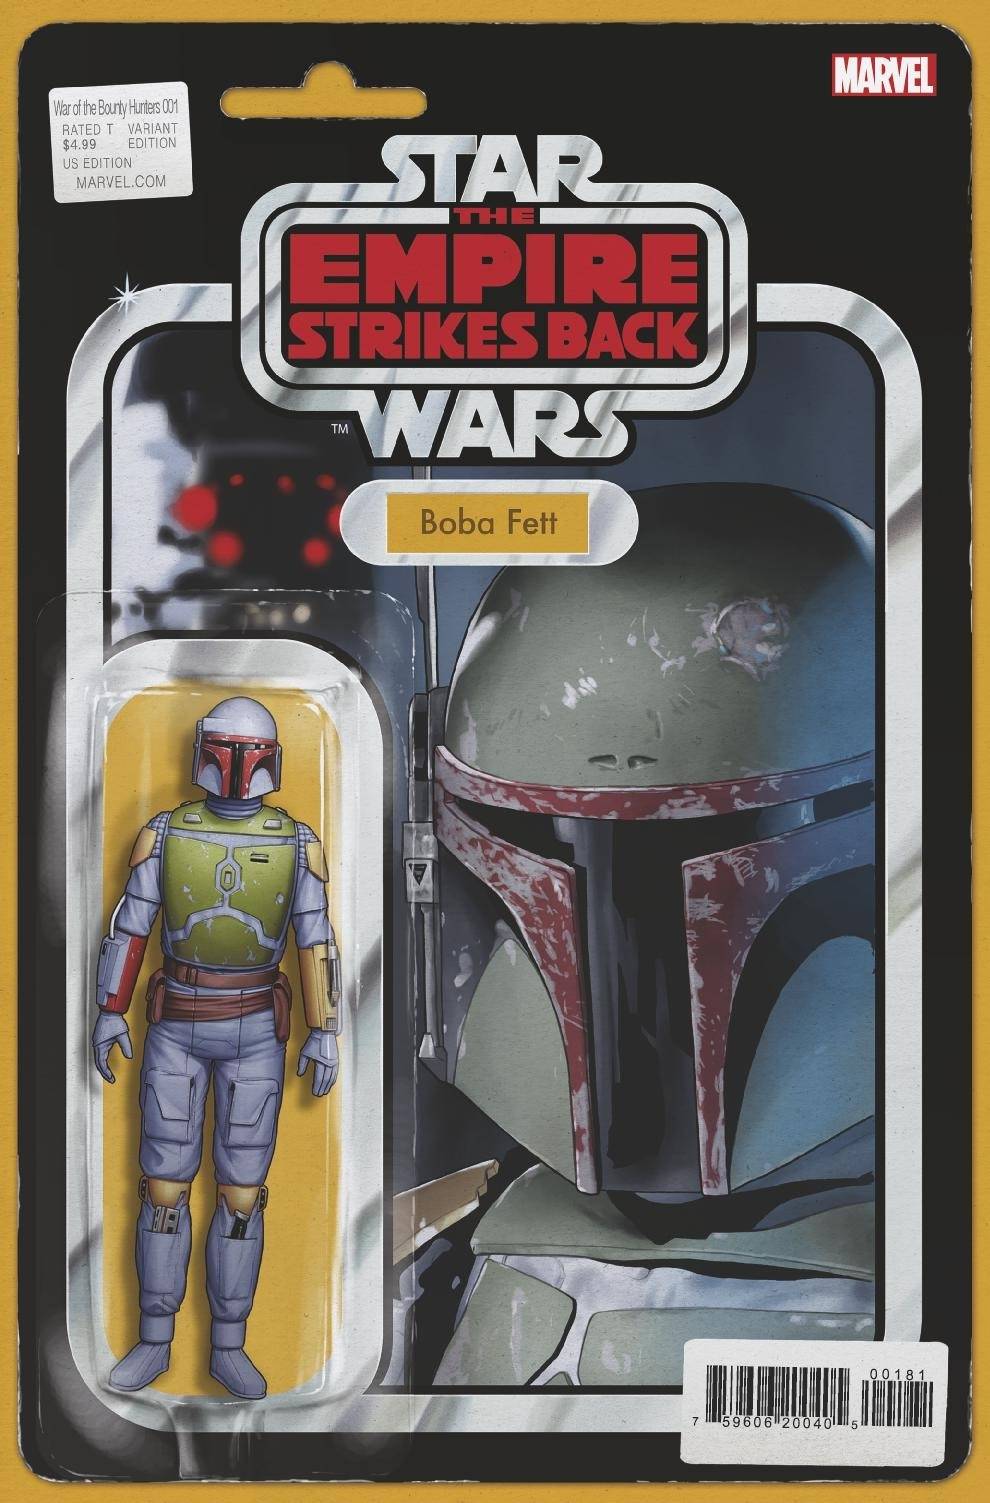 War of the Bounty Hunters #1 ("Boba Fett" Action Figure Variant Cover) (02.06.2021)